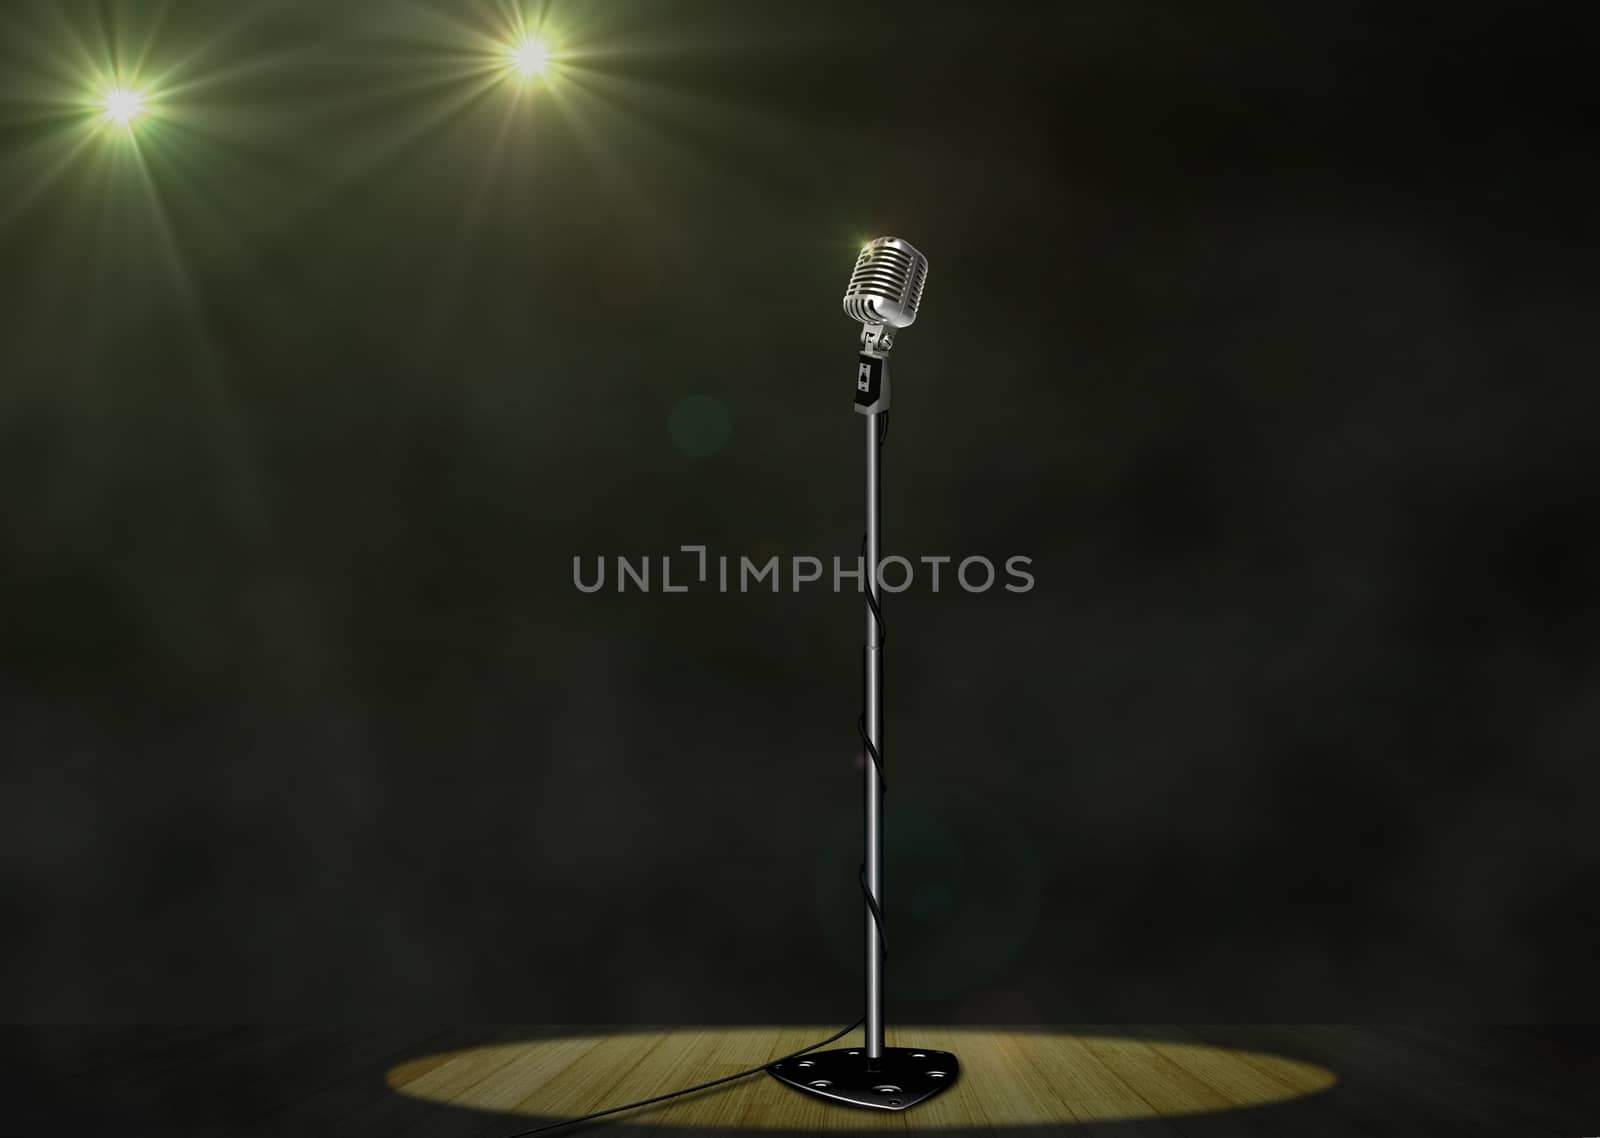 Vintage Microphone with Spotlights on Stage